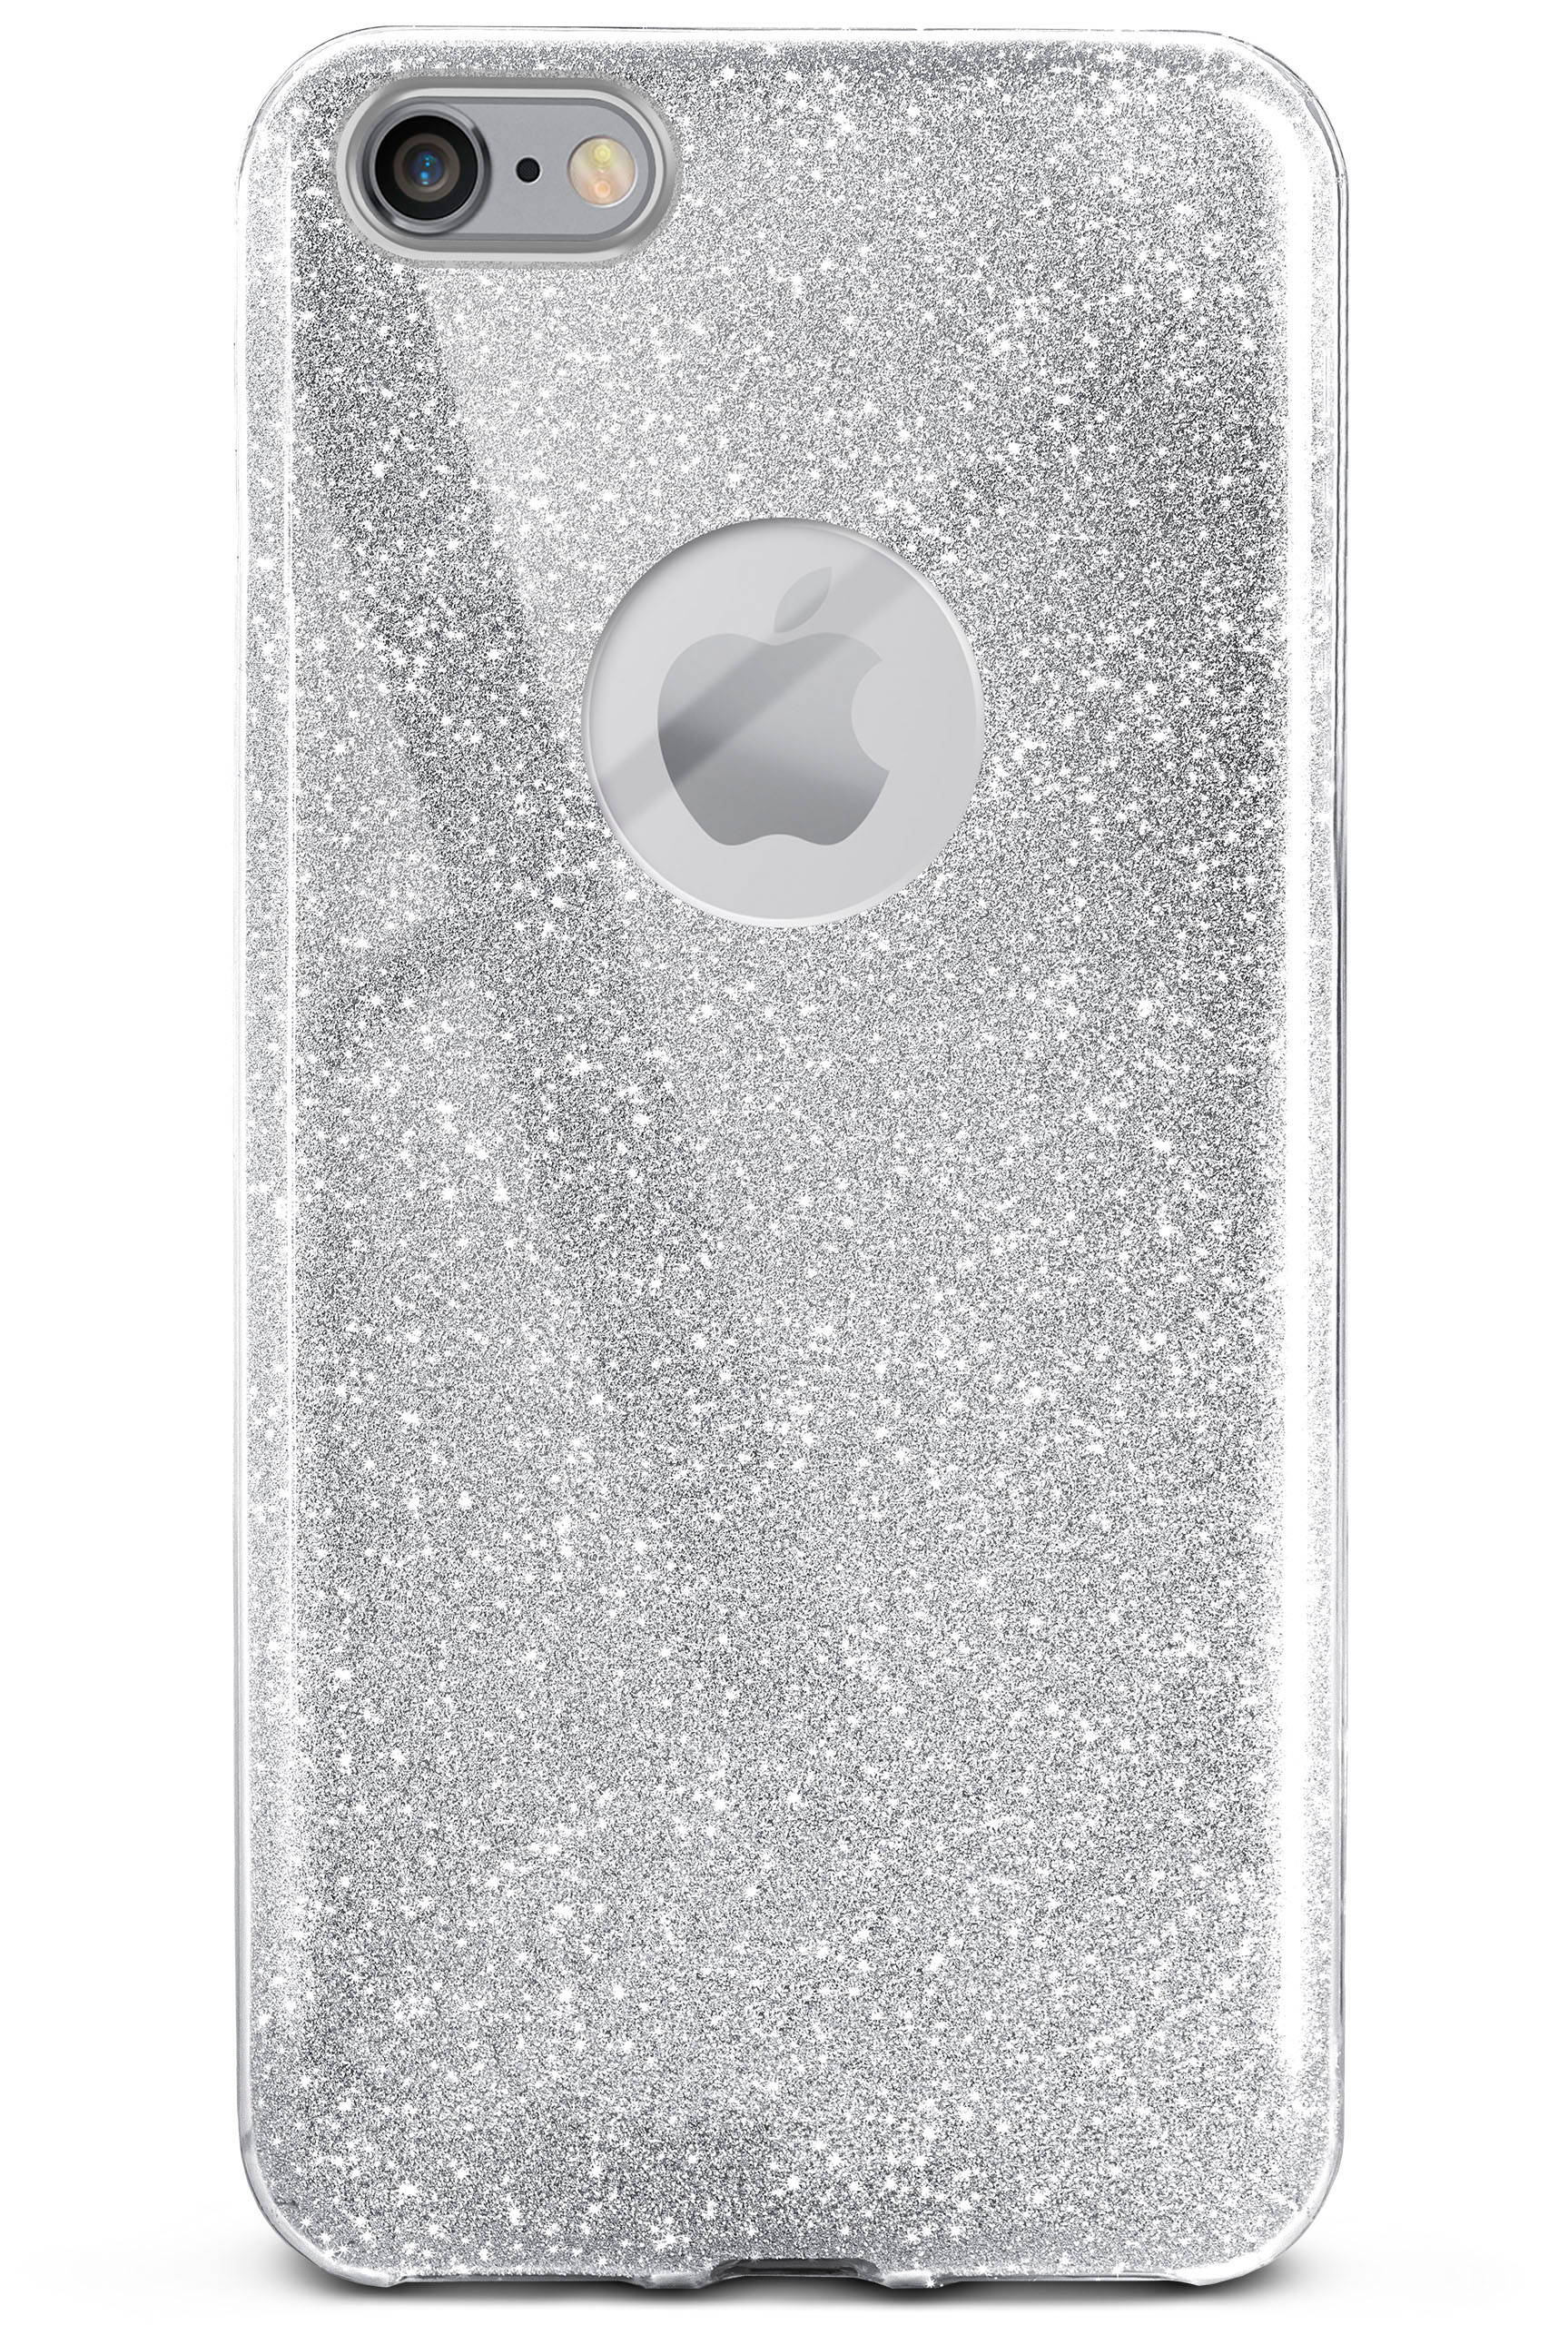 ONEFLOW Glitter Case, Backcover, Apple, Silver / - Sparkle iPhone 6, iPhone 6s